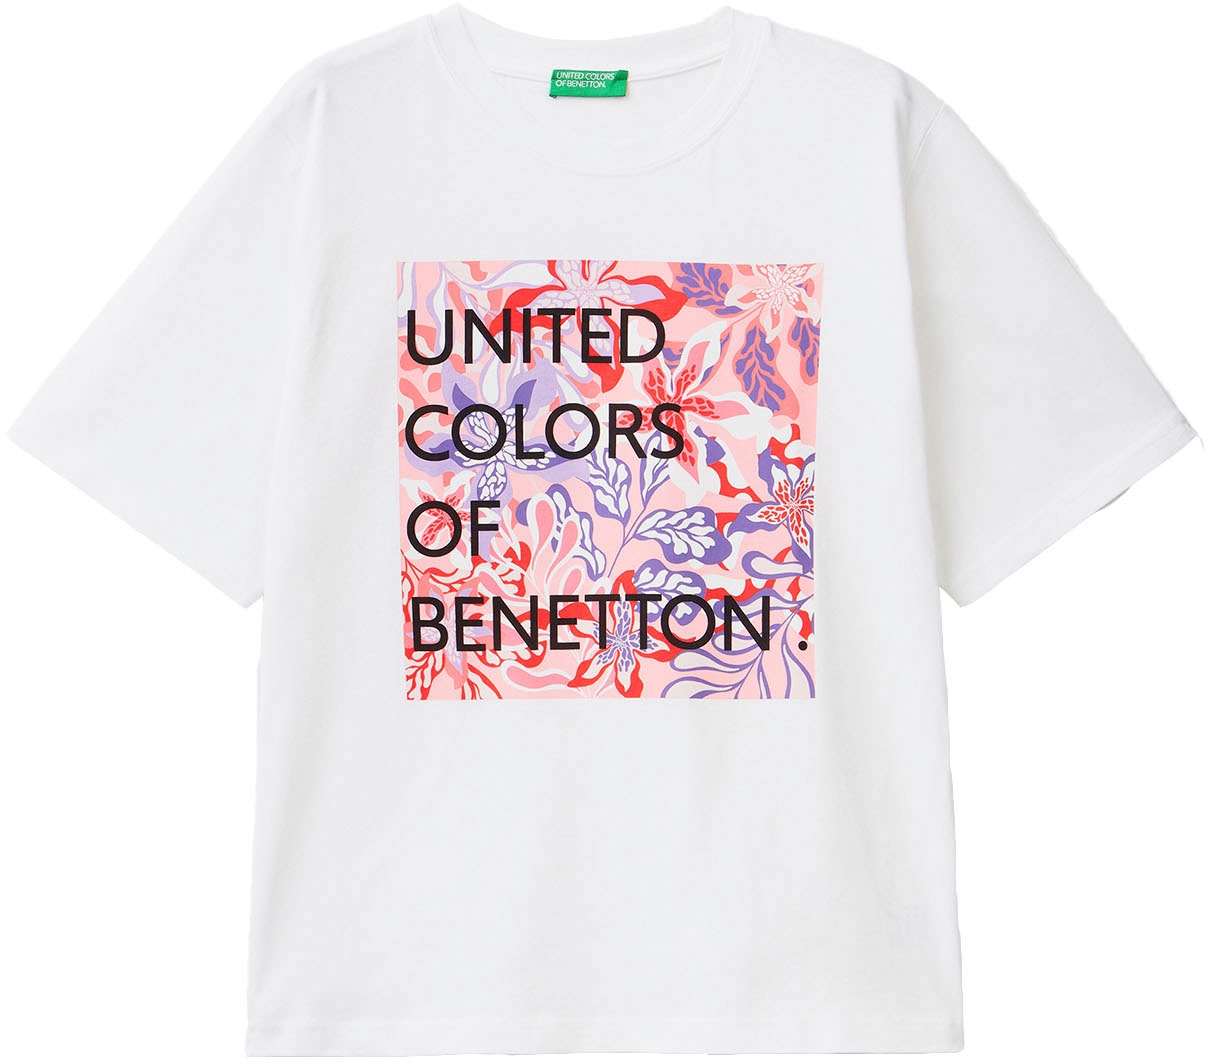 bei Benetton T-Shirt of ♕ United Colors